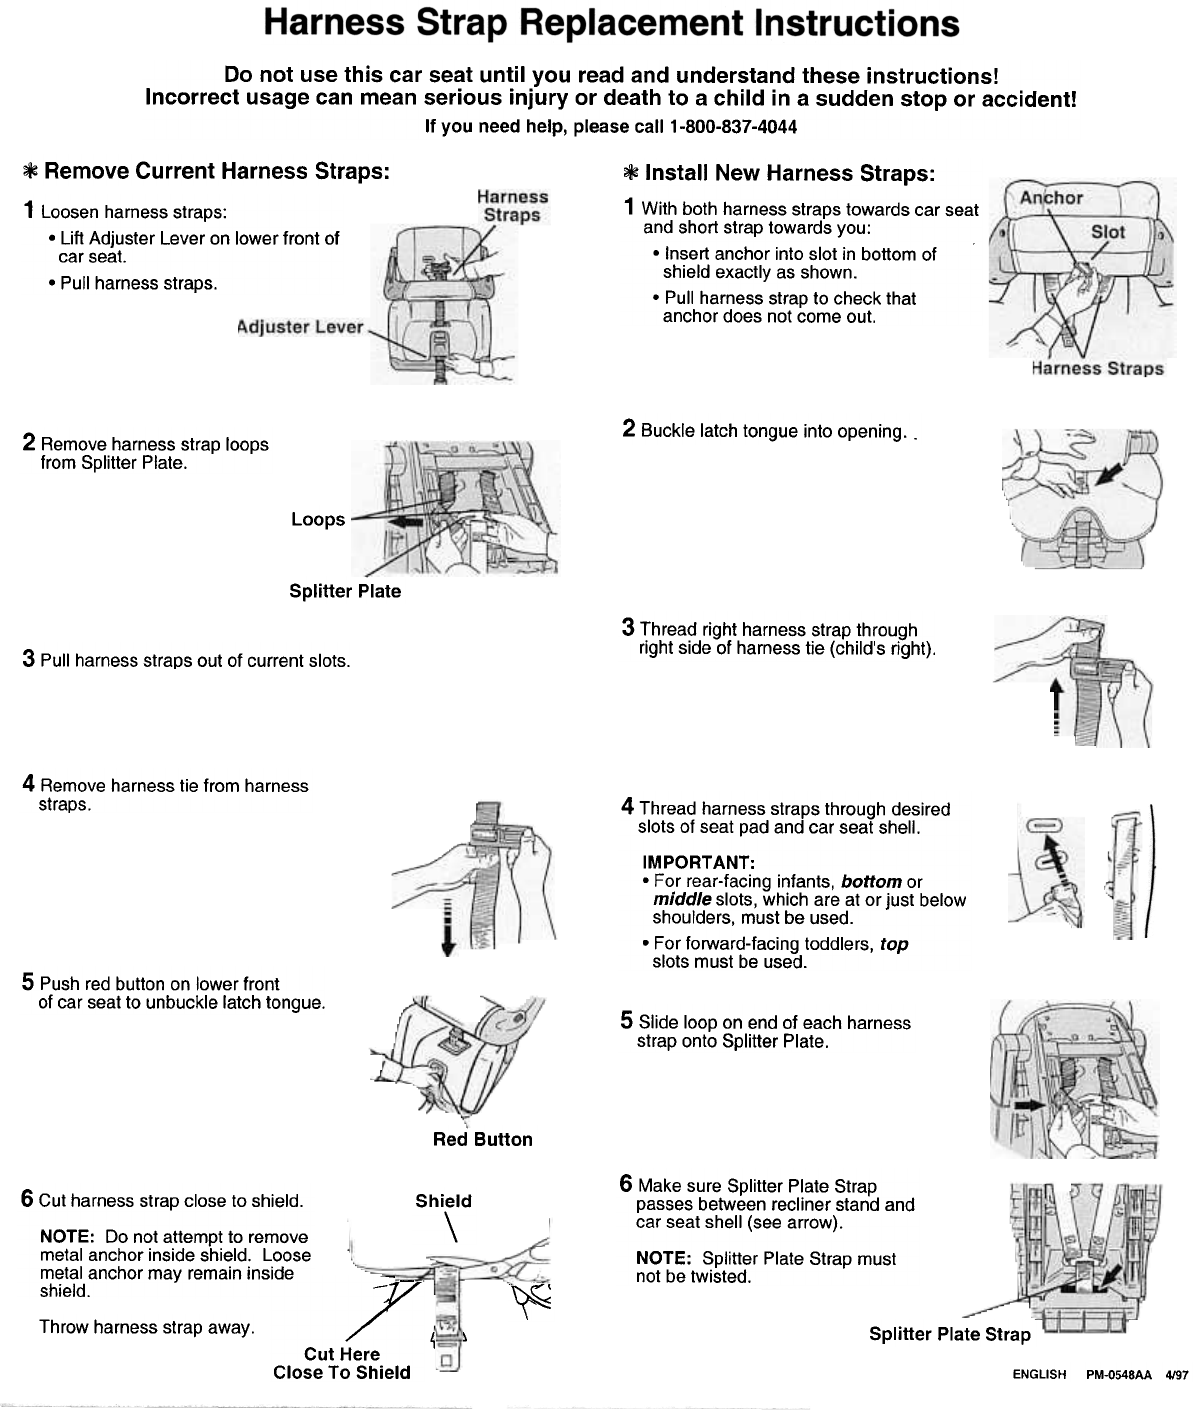 Graco Infant Car Seat Harness Instructions - Velcromag